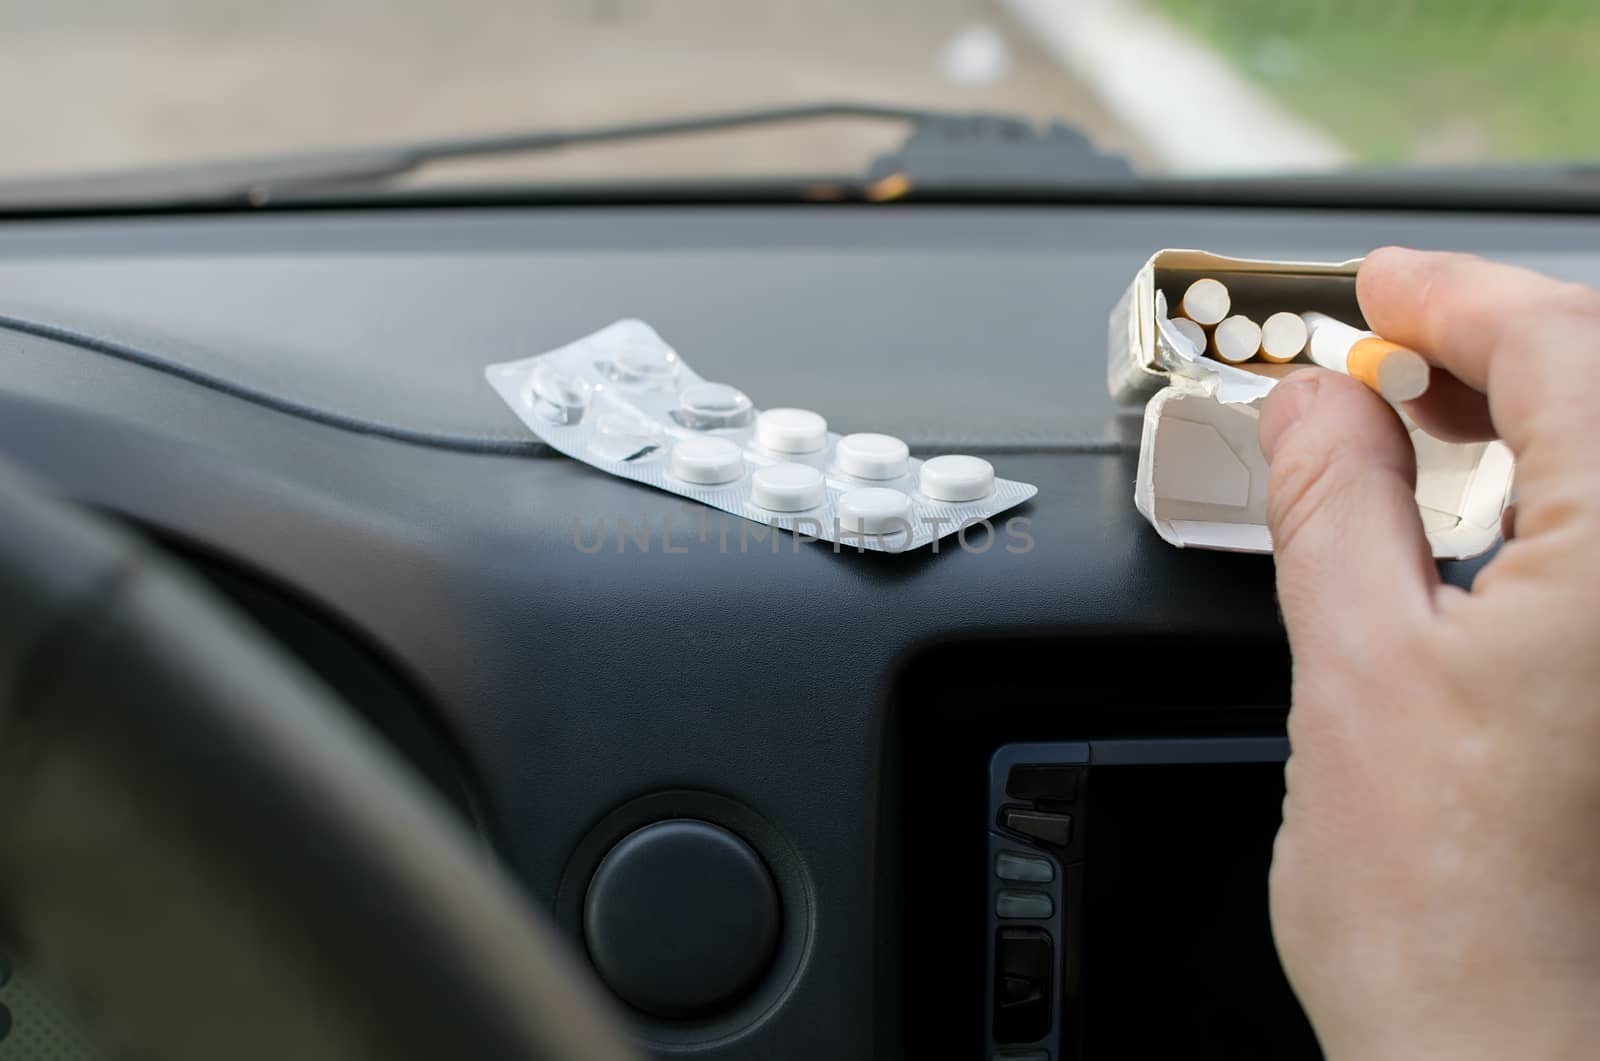 the hand of the person, the driver, takes a cigarette from the panel of the car with the package of tablets lying nearby